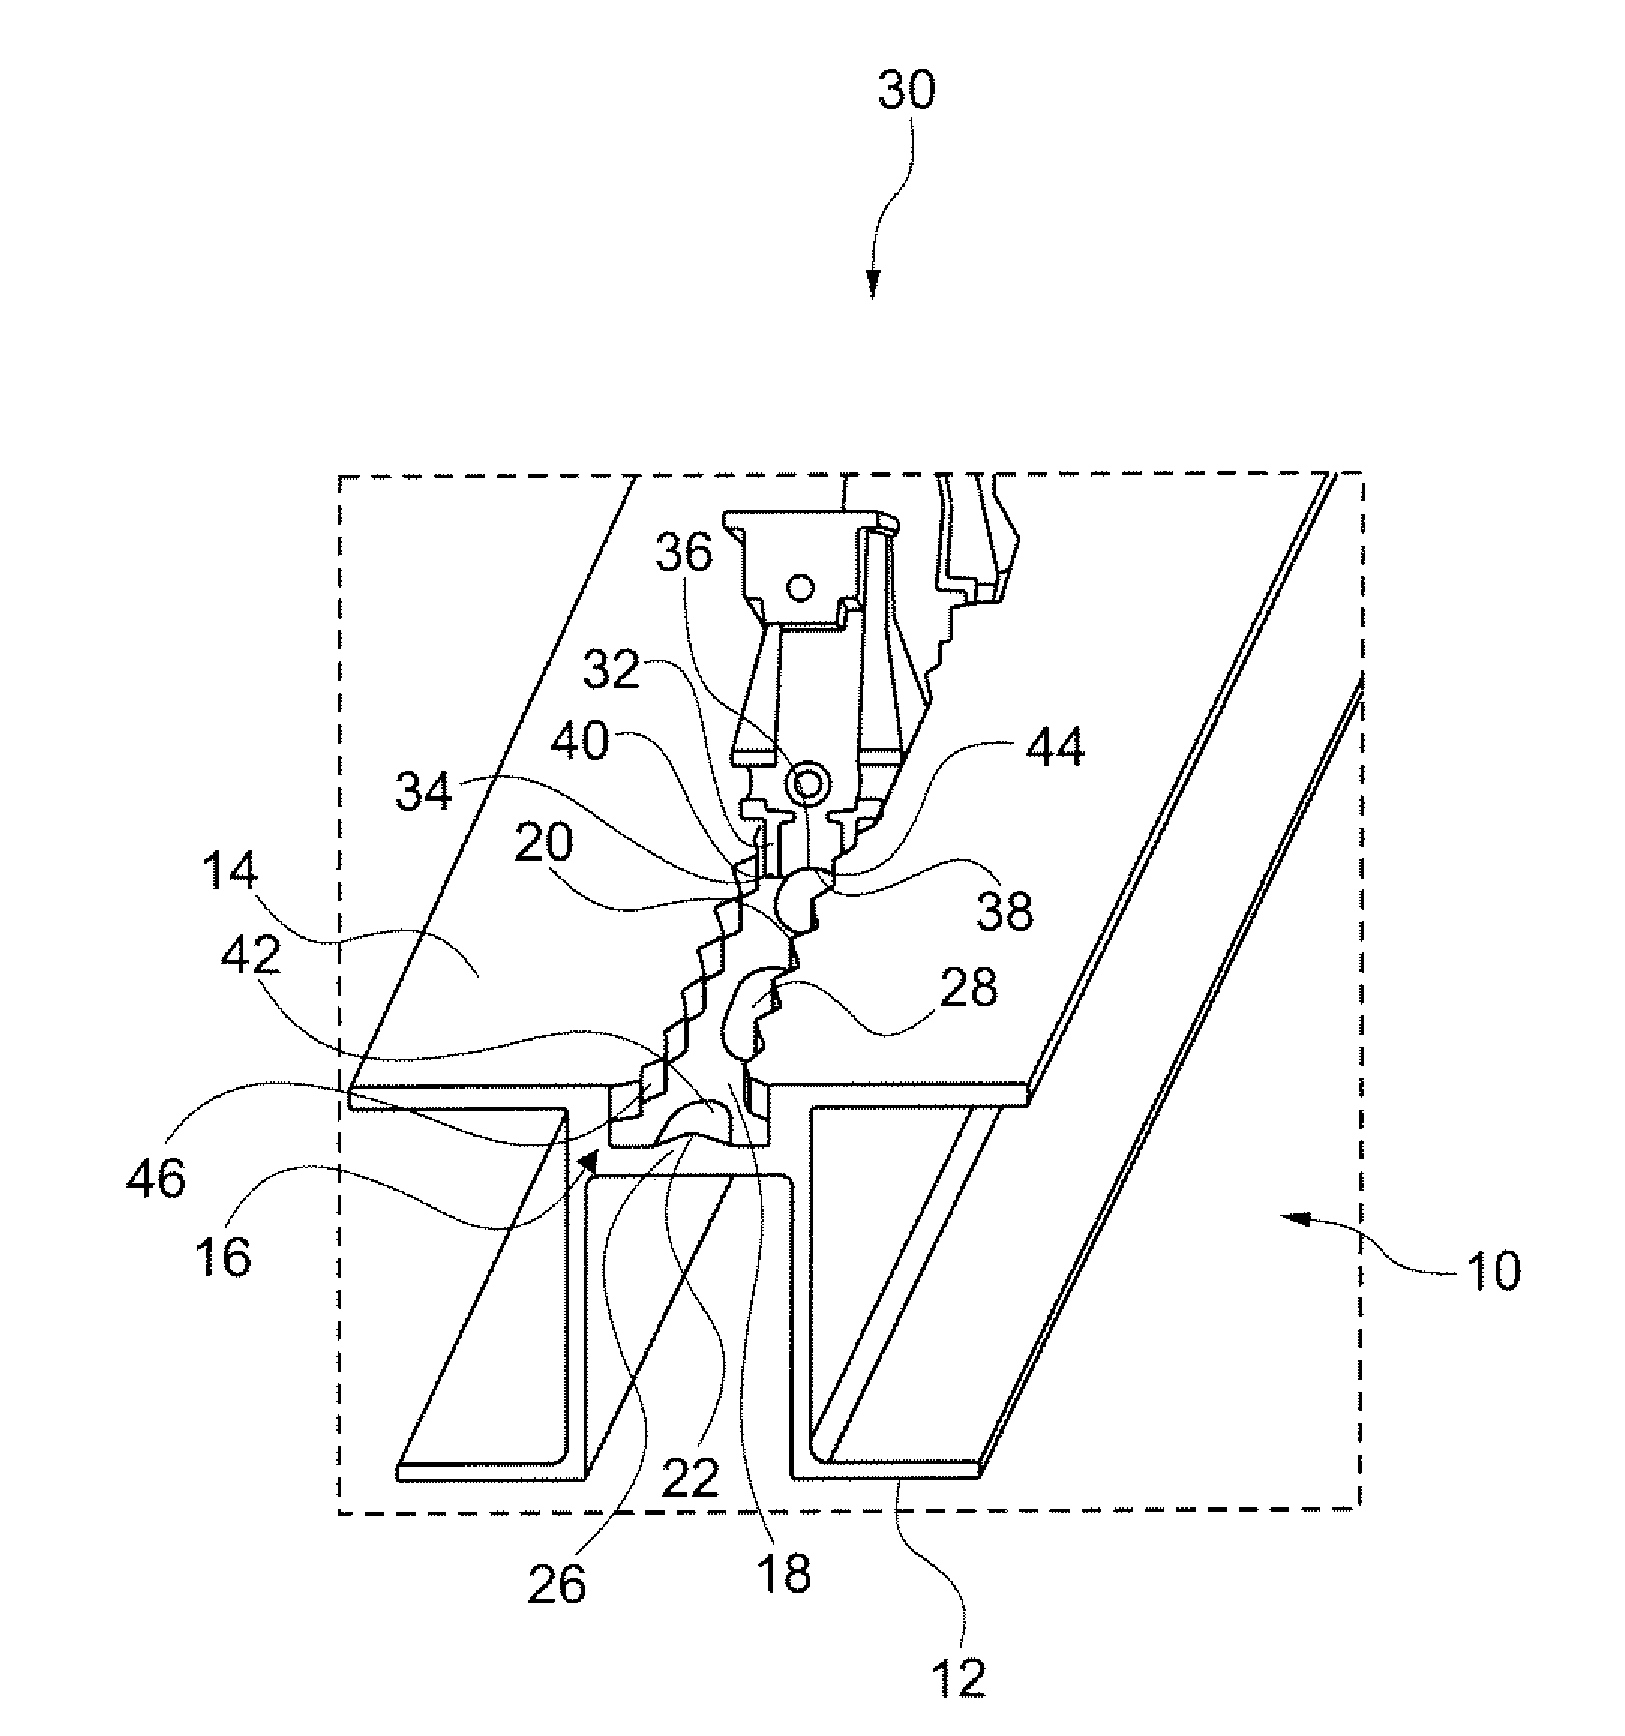 Rail arrangement for guiding a fitting inside guiding rails particularly in aircrafts